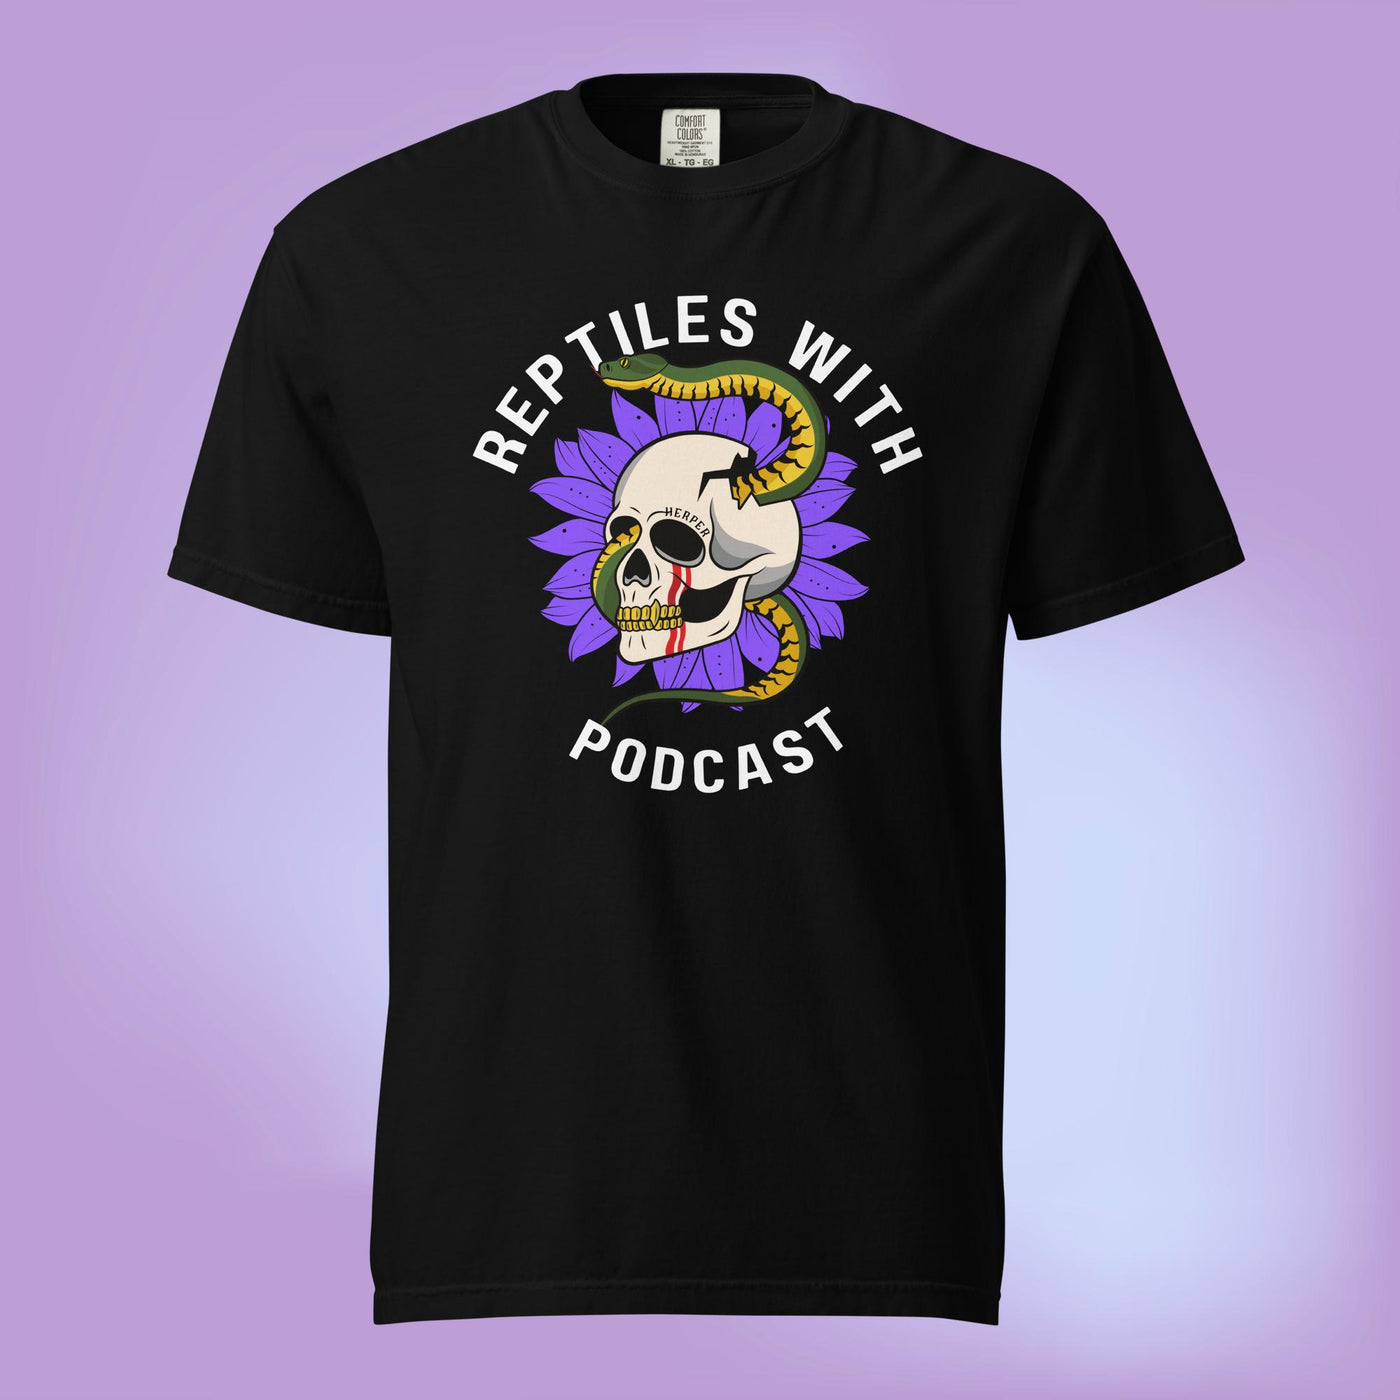 Flower Skull Reptiles With t-shirt